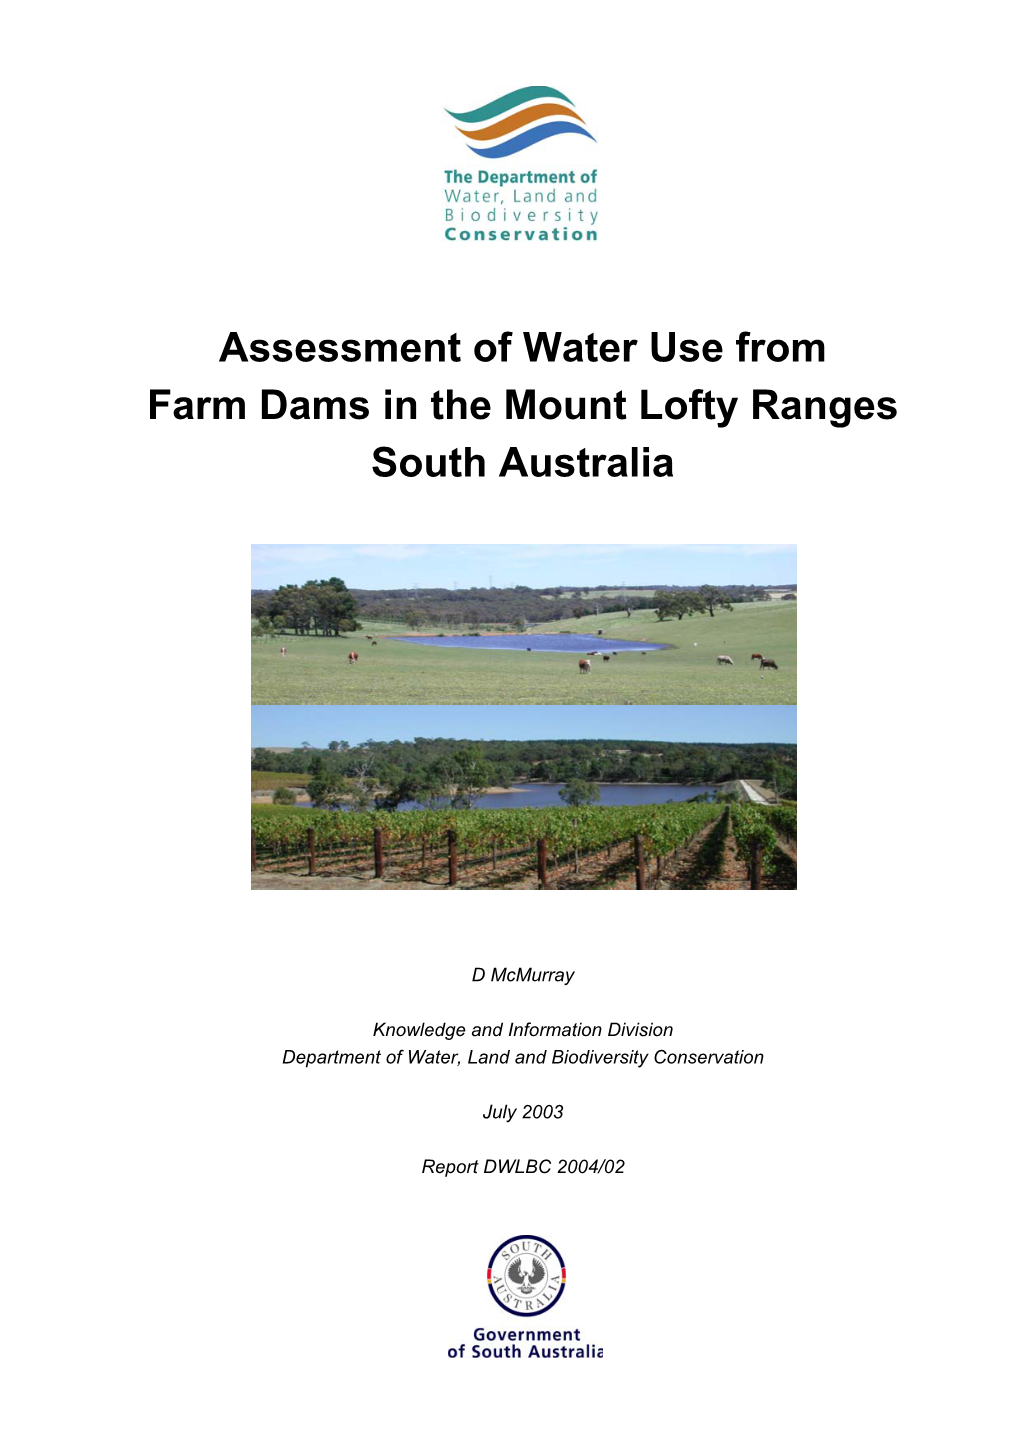 Assessment of Water Use from Farm Dams in the Mount Lofty Ranges South Australia